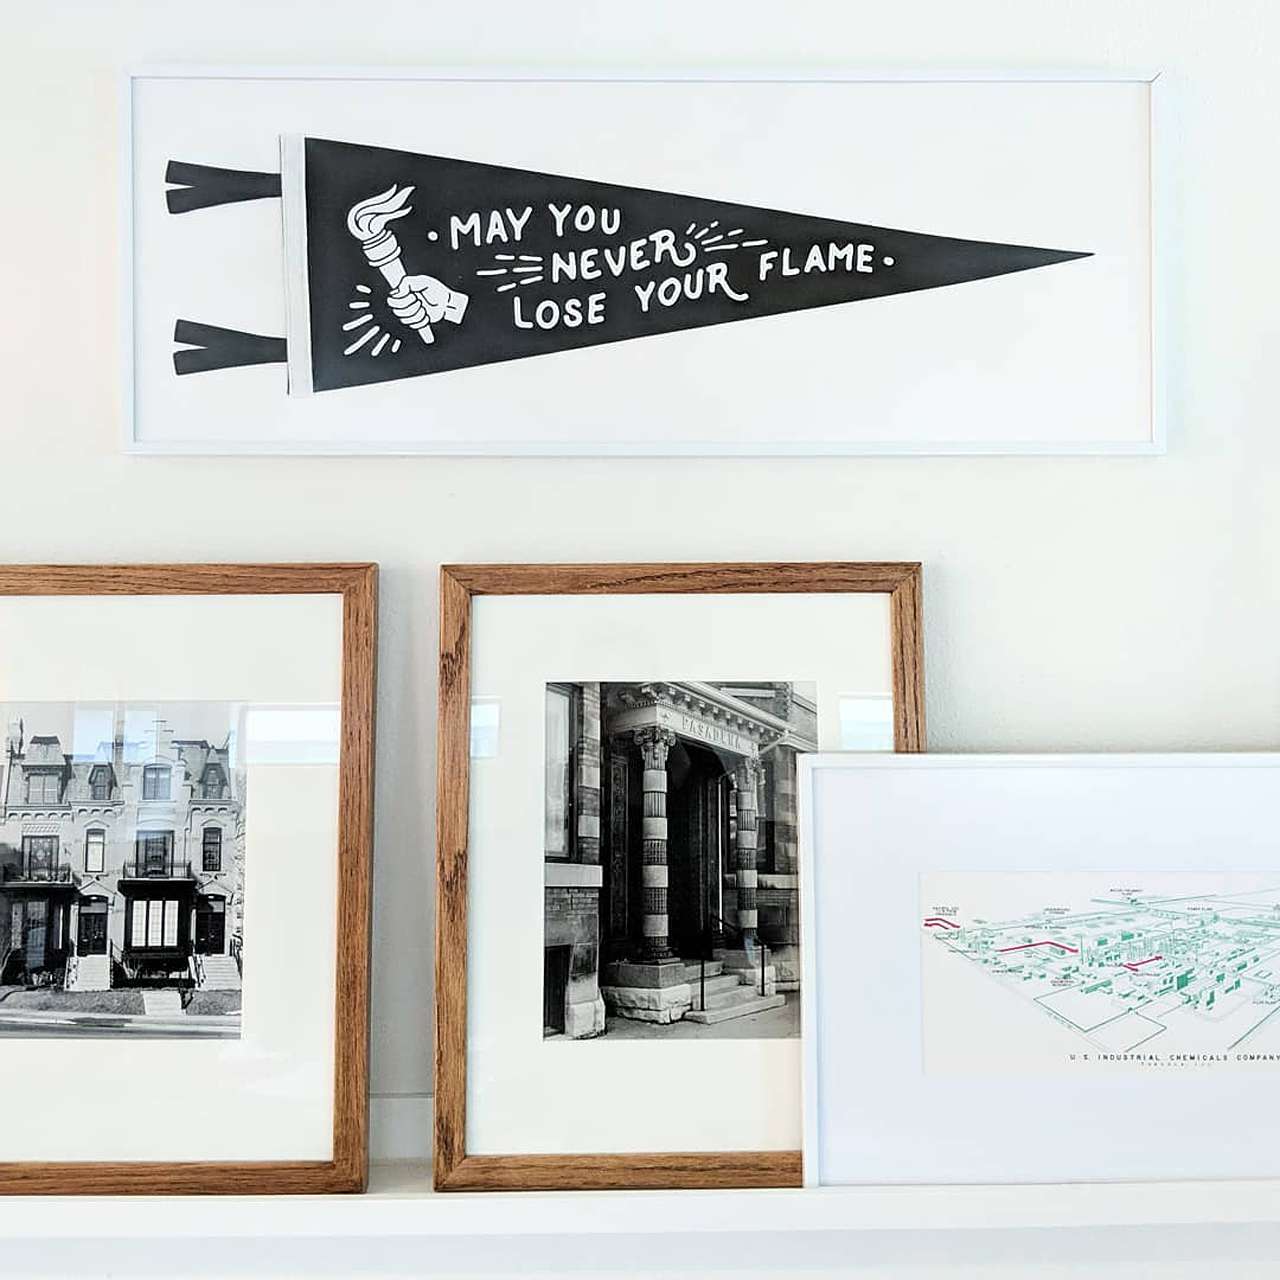 Our Favorite Picture Frame Ideas